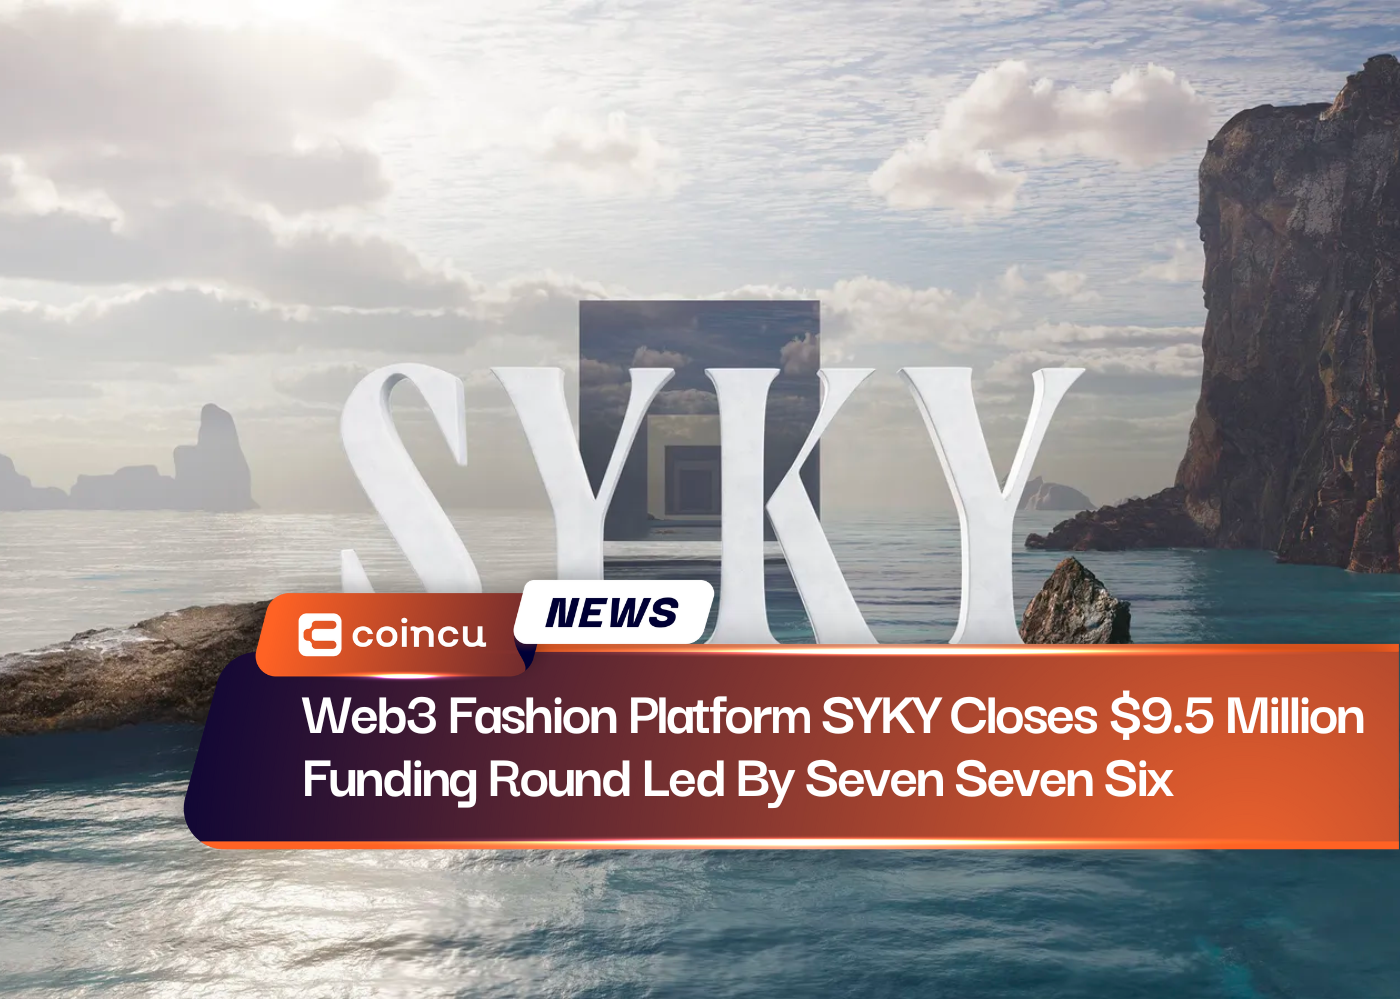 Web3 Fashion Platform SYKY Closes $9.5 Million Funding Round Led By Seven Seven Six